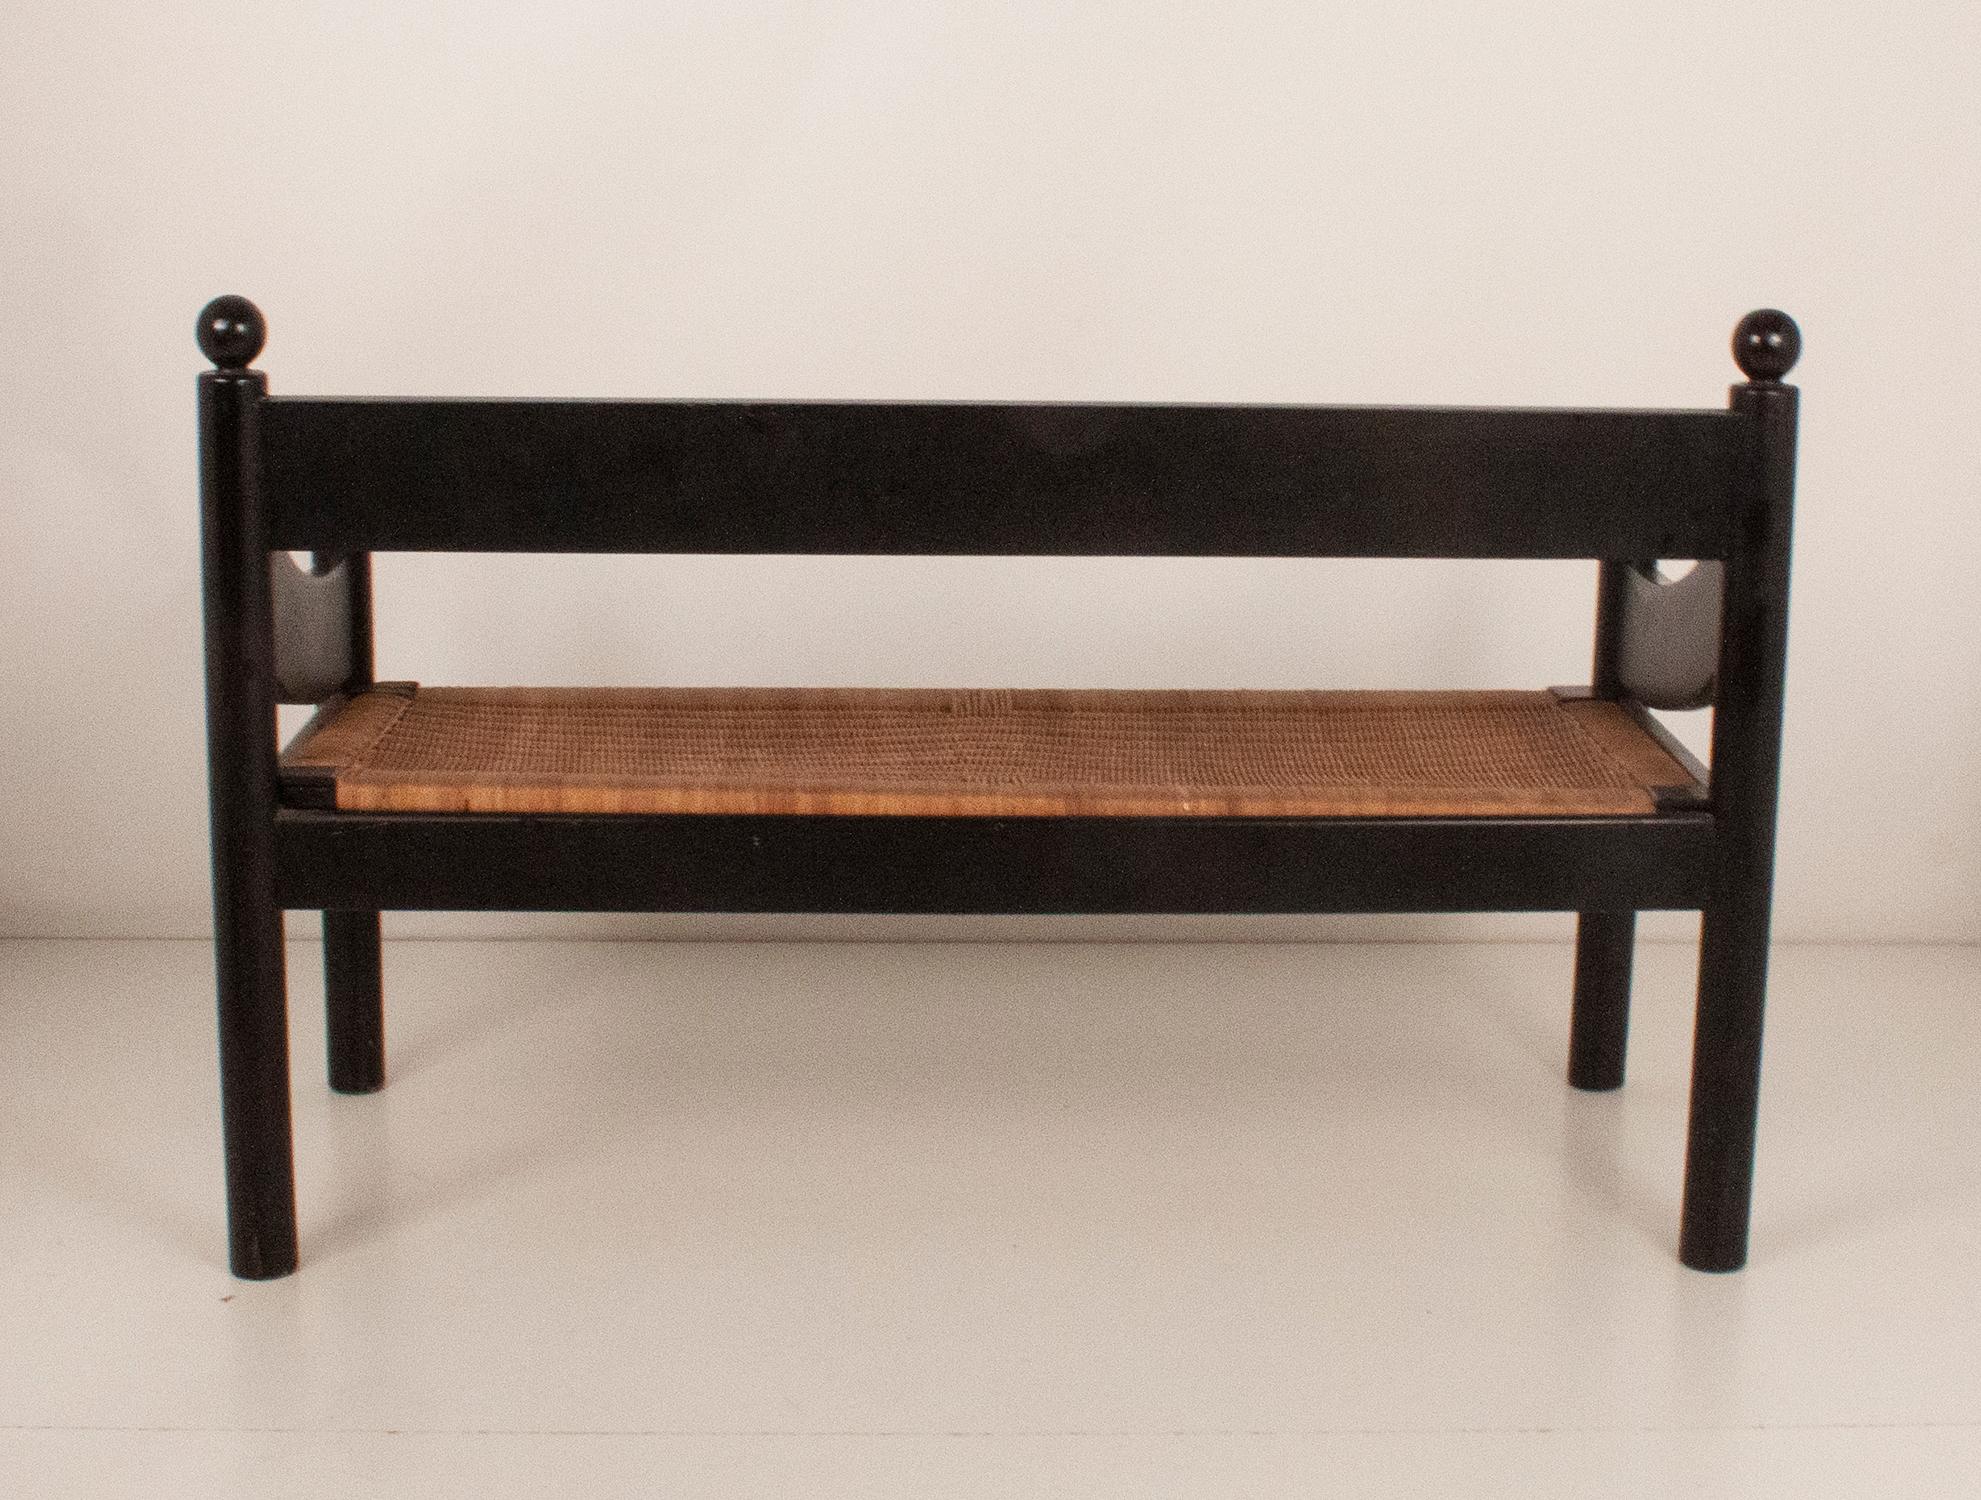 Spanish Bench in Black Lacquered Wood and Rush, by Joaquin Belsa, Spain 1970's